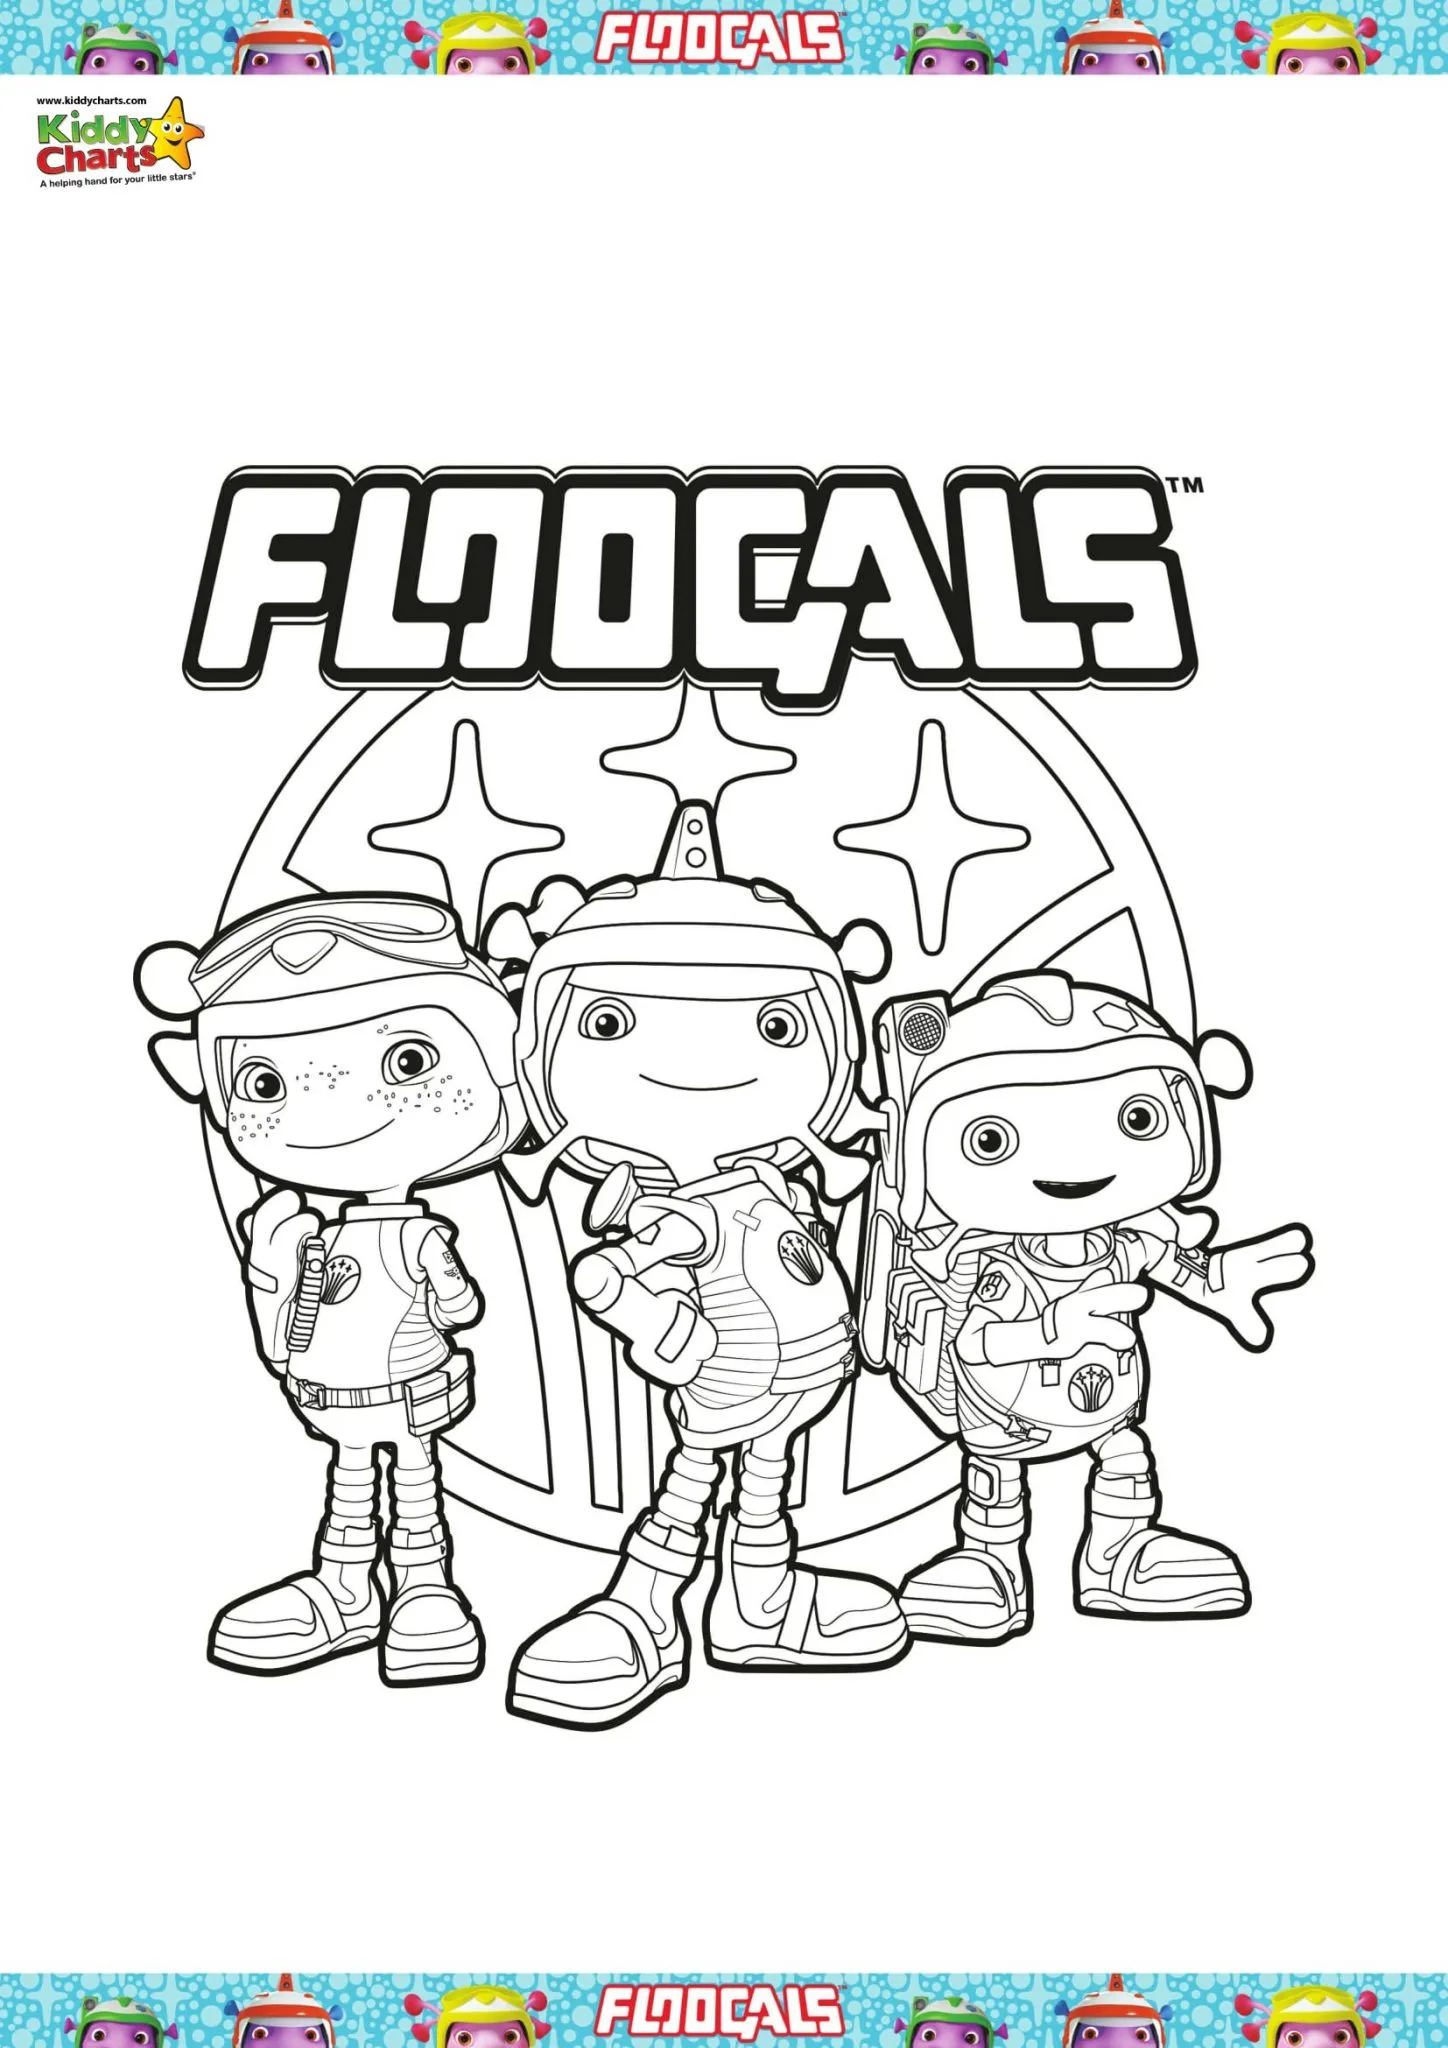 We've got this great floogals colouring sheet for you all - its fun fun fun!